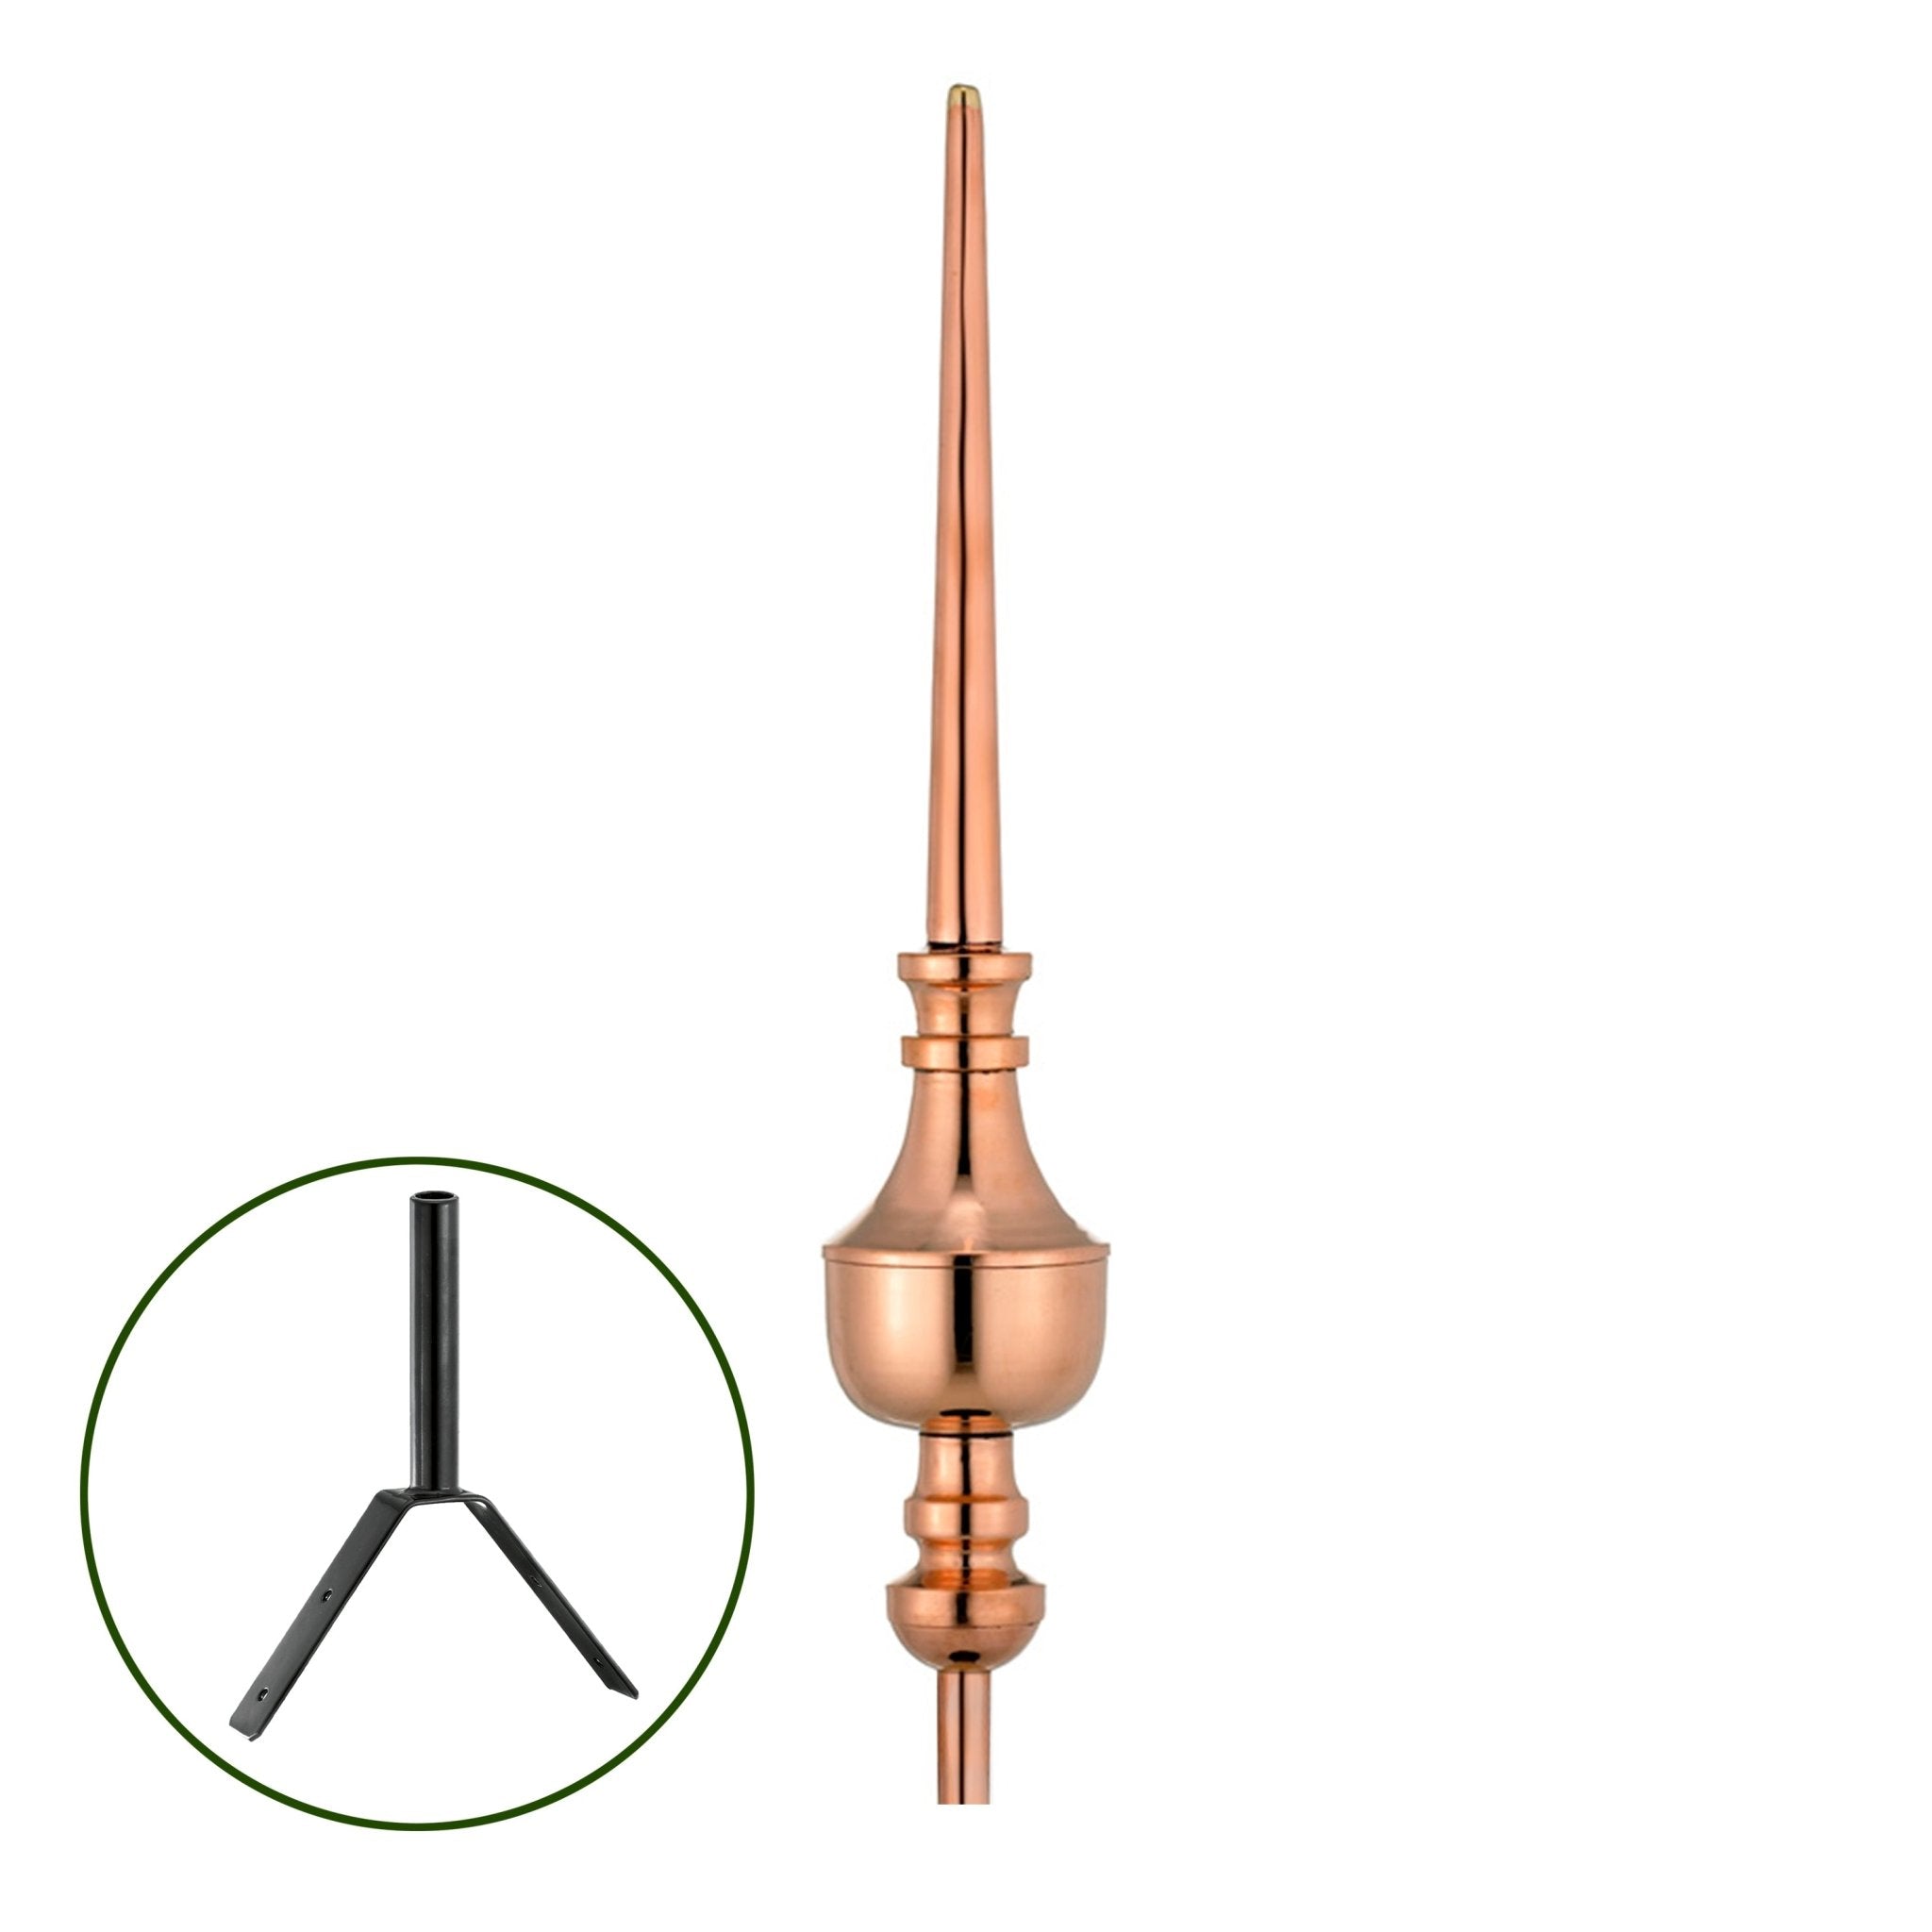 27" Victoria Rooftop Finial - Good Directions